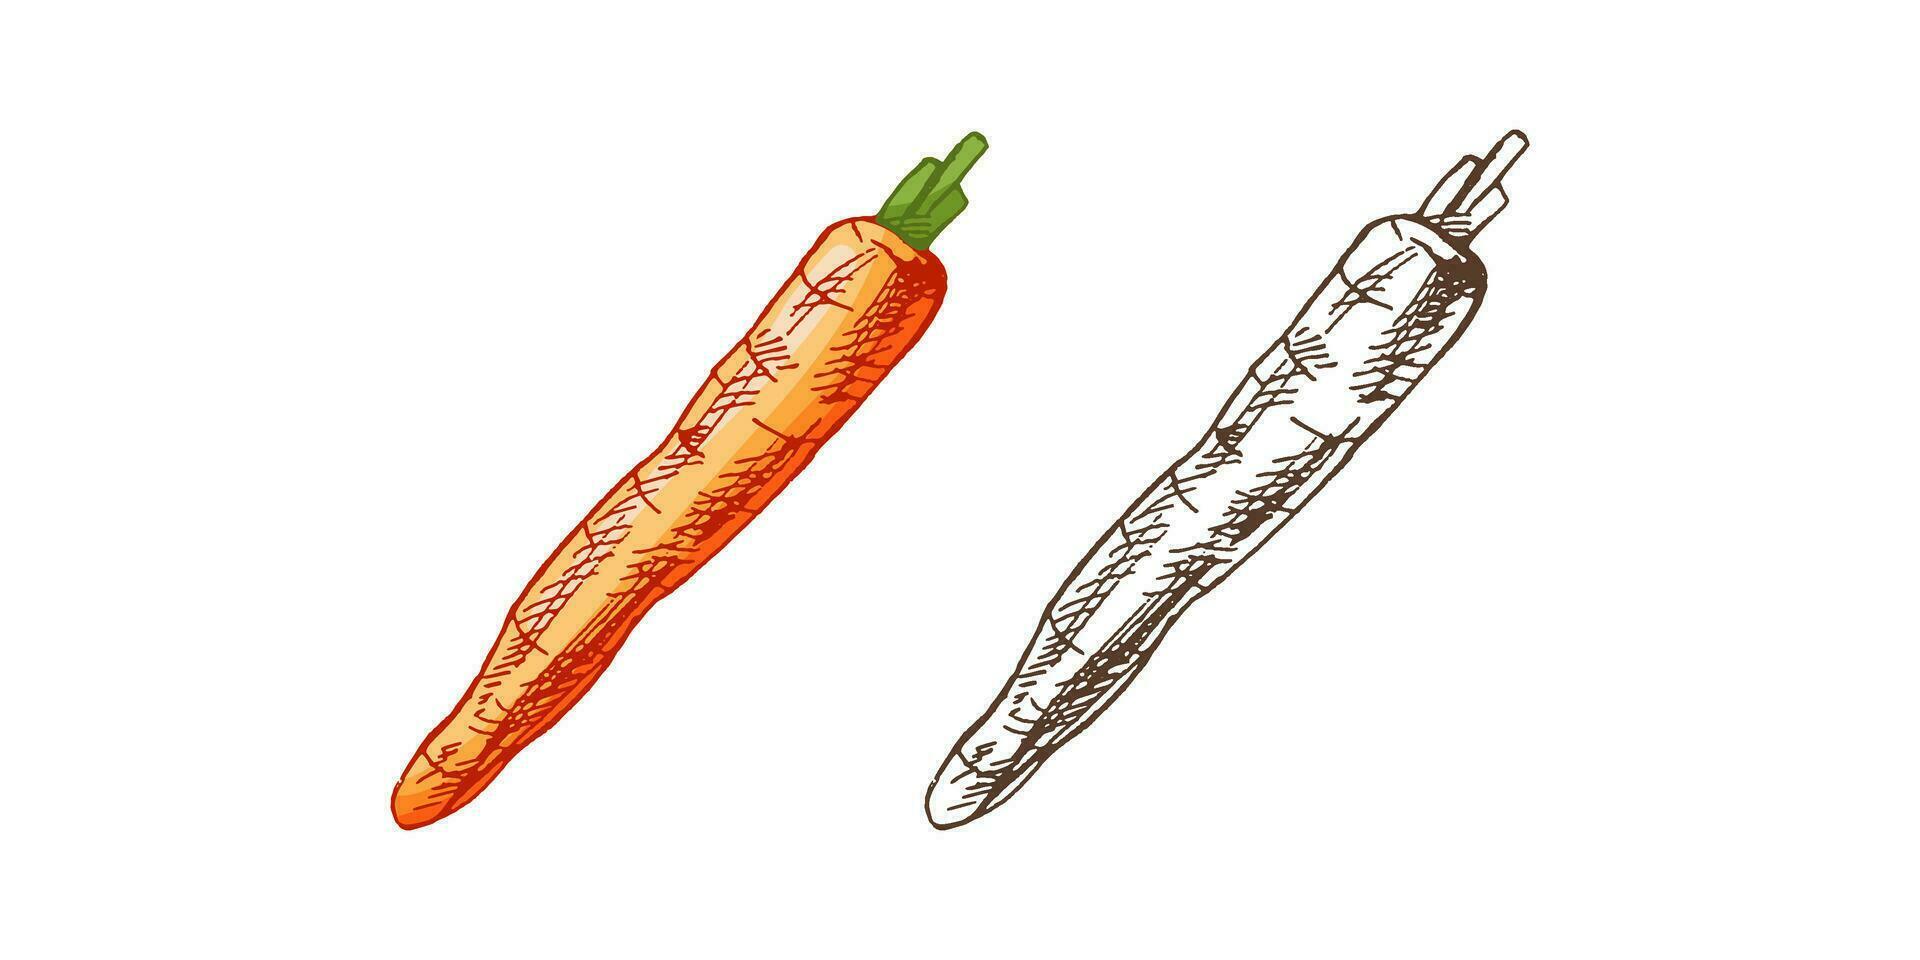 Organic food. Hand-drawn colored and monochrome vector sketches of carrot. Doodle vintage illustration. Decorations for the menu and labels. Engraved image.